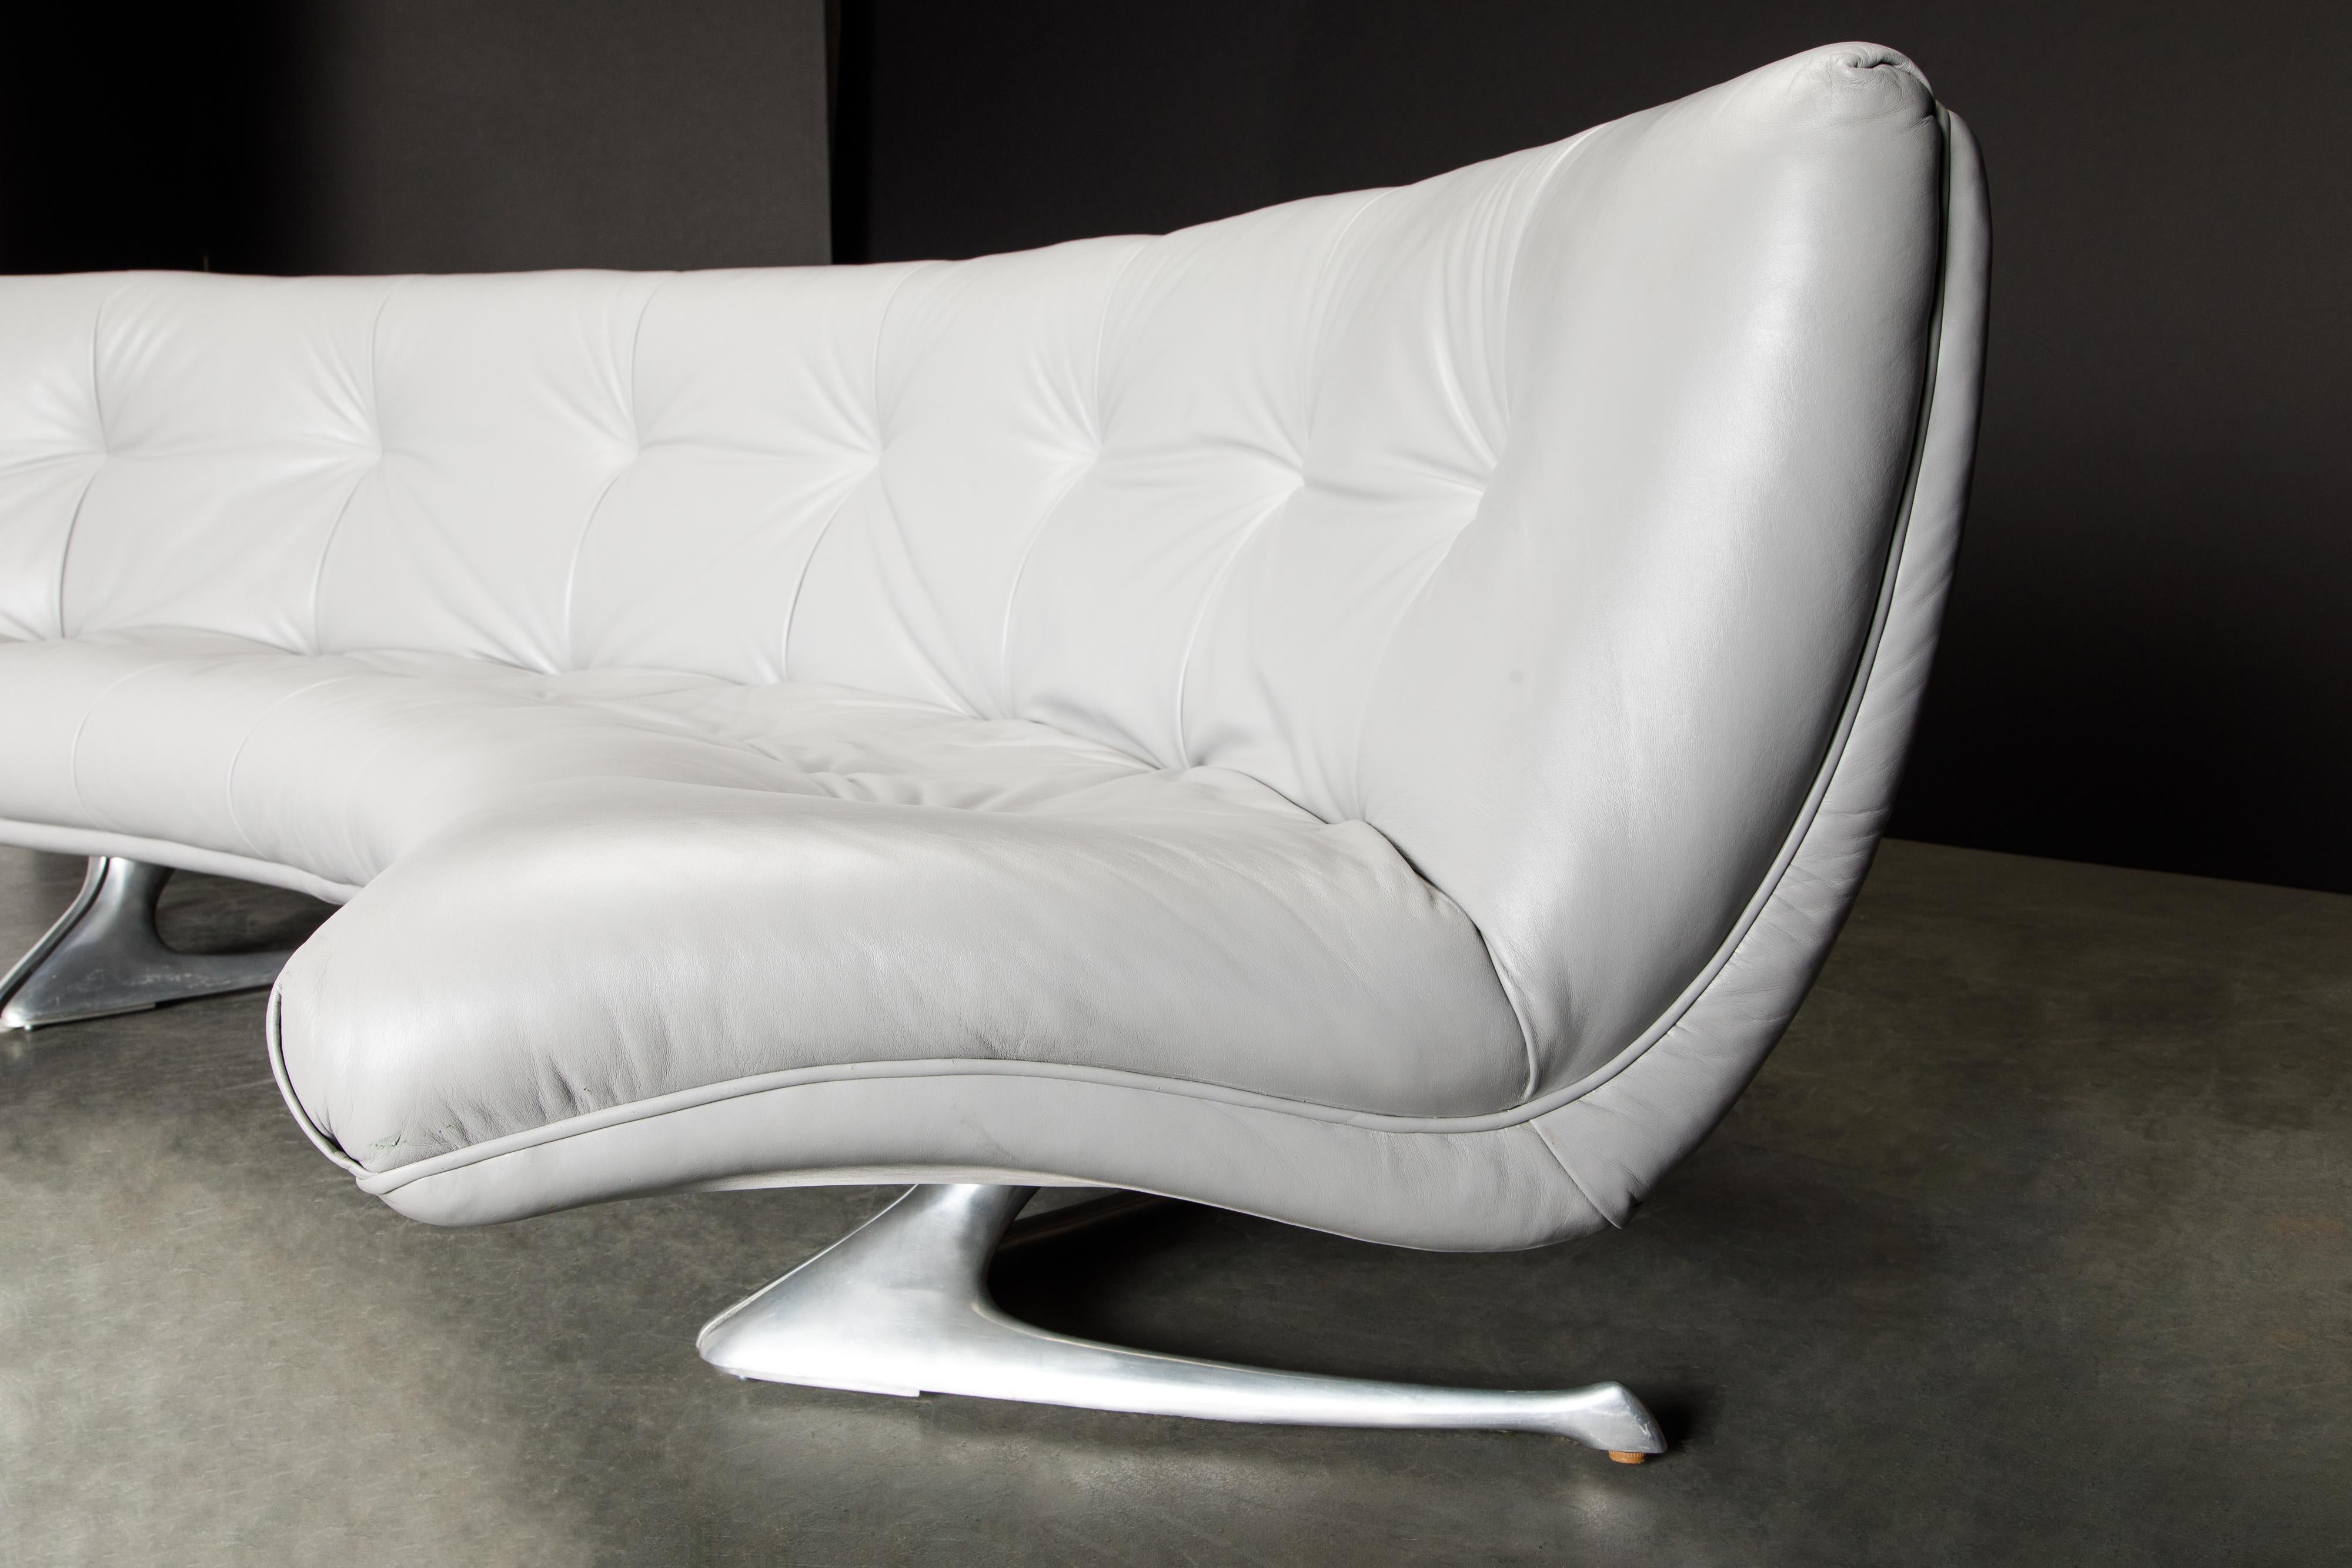 Mid-20th Century Rare 'Unicorn' Leather and Aluminum Curved Sofa by Vladimir Kagan, c. 1963 For Sale